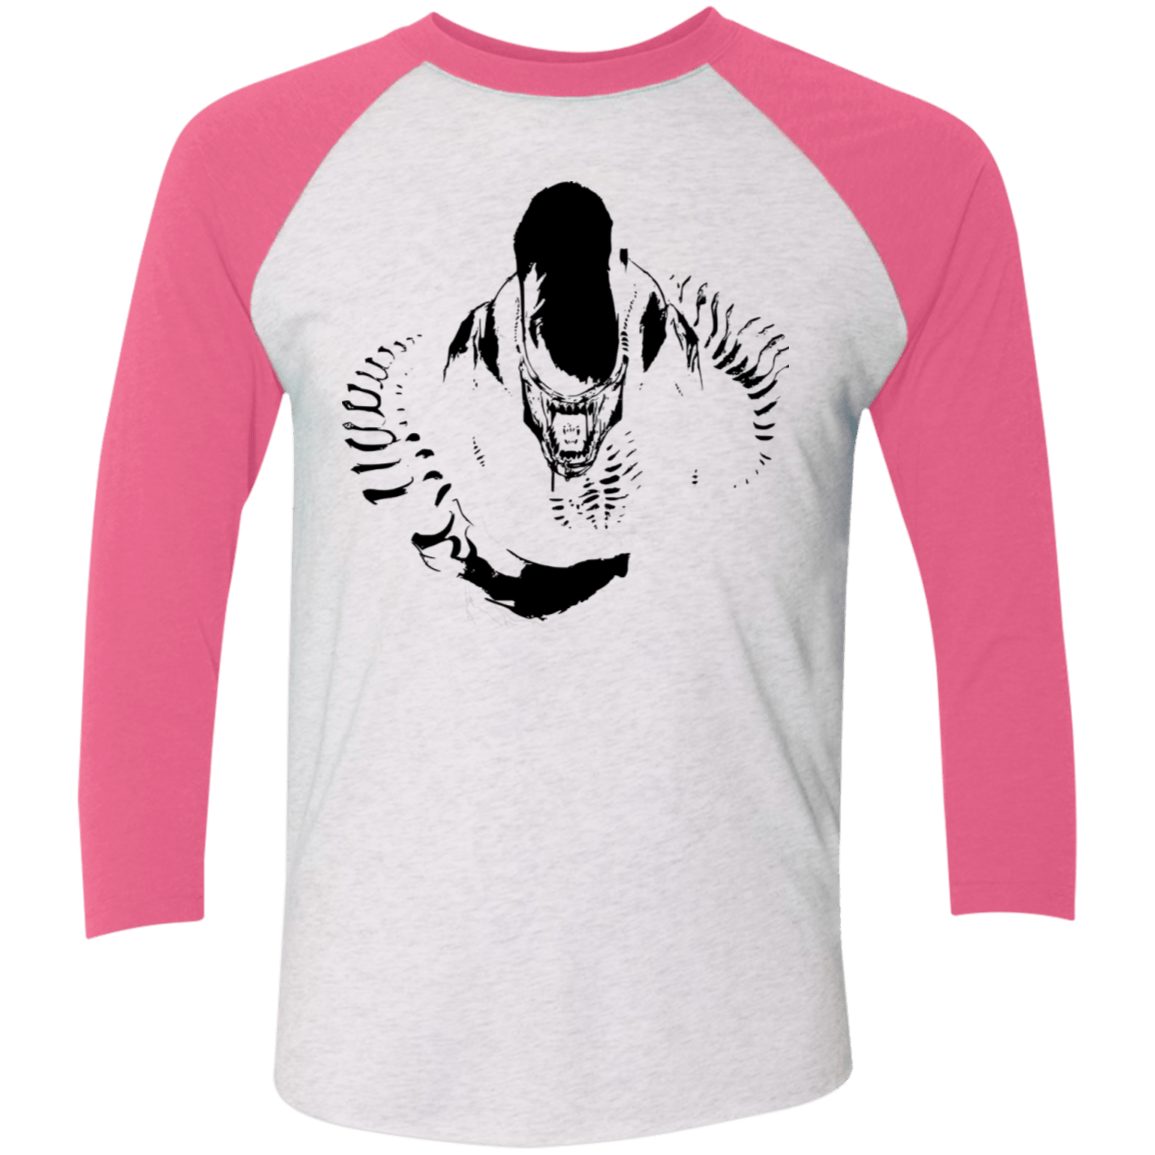 T-Shirts Heather White/Vintage Pink / X-Small Run Men's Triblend 3/4 Sleeve